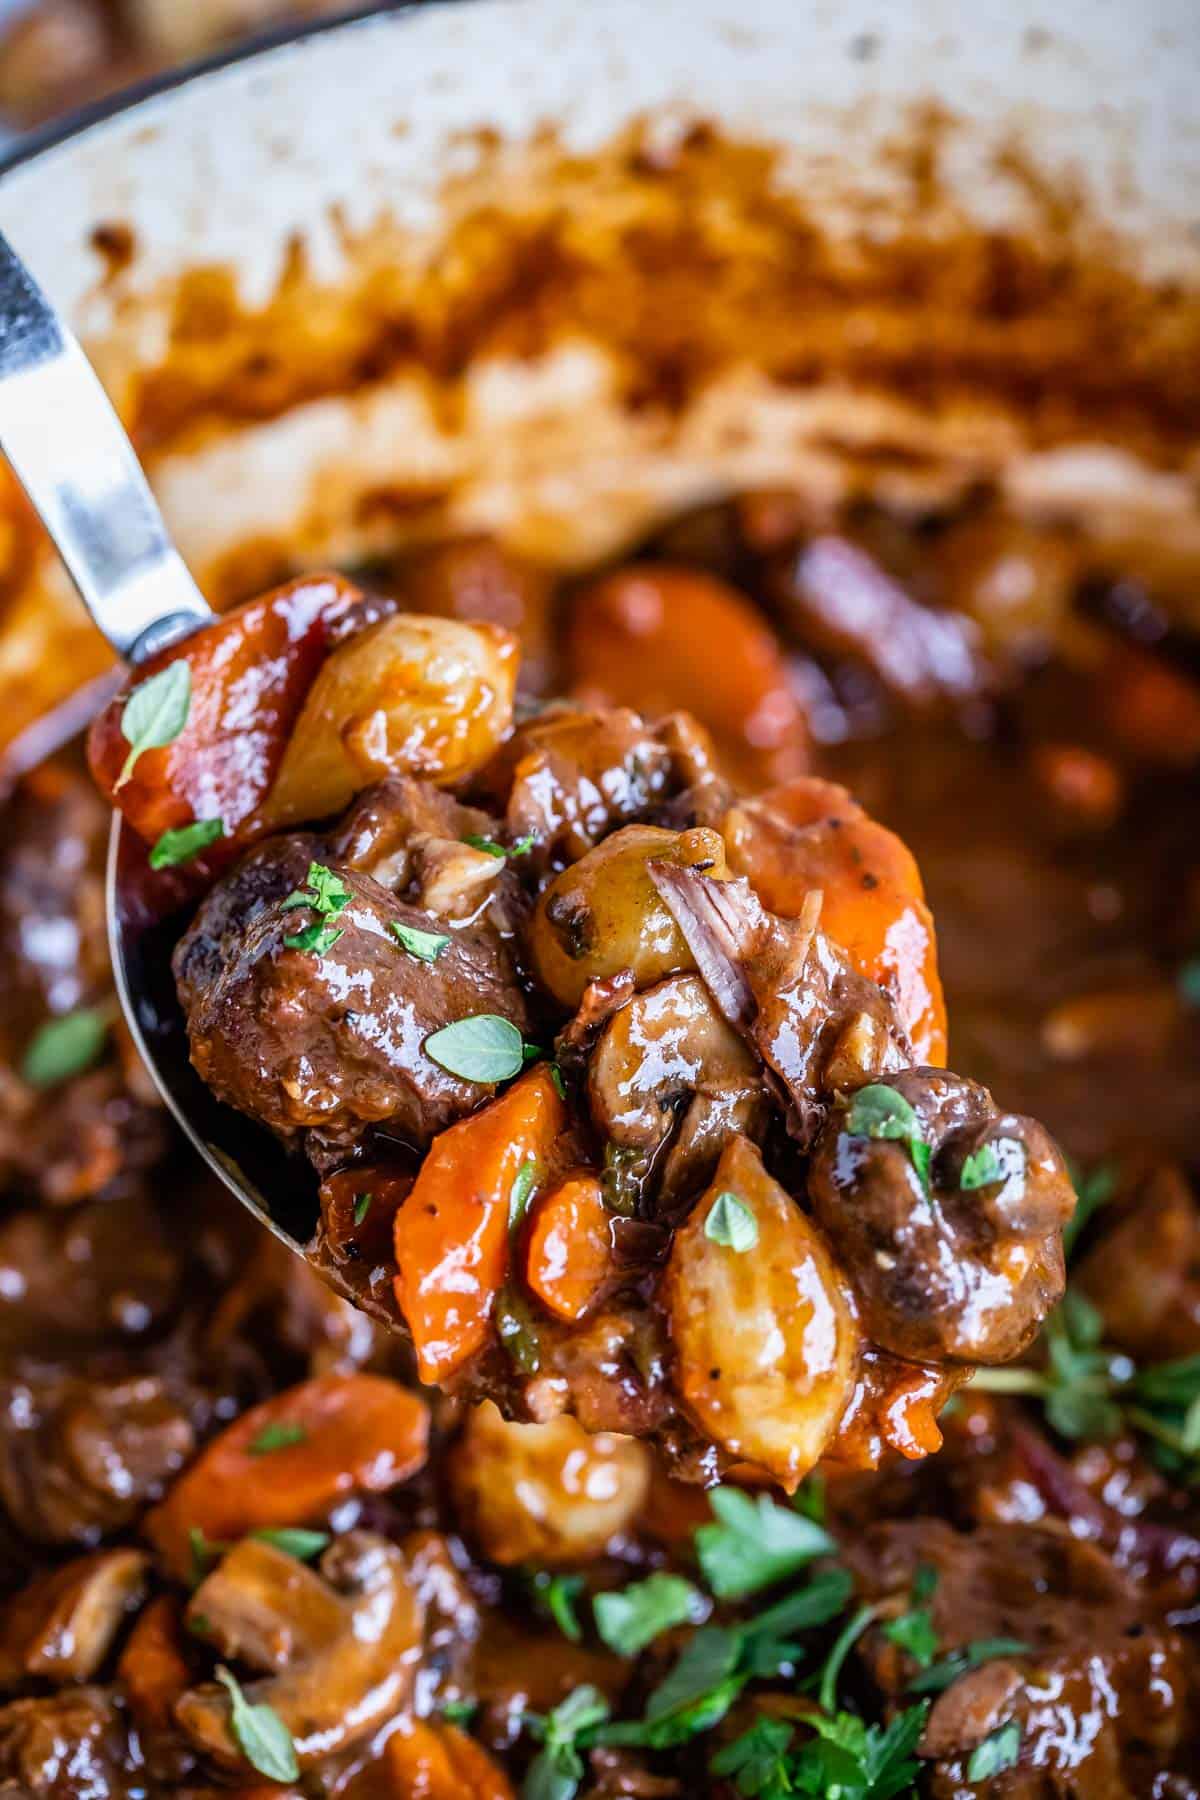 Indulge in the exquisite flavors of our 500g Beef Bourguignon, a perfect dinner solution for two or three